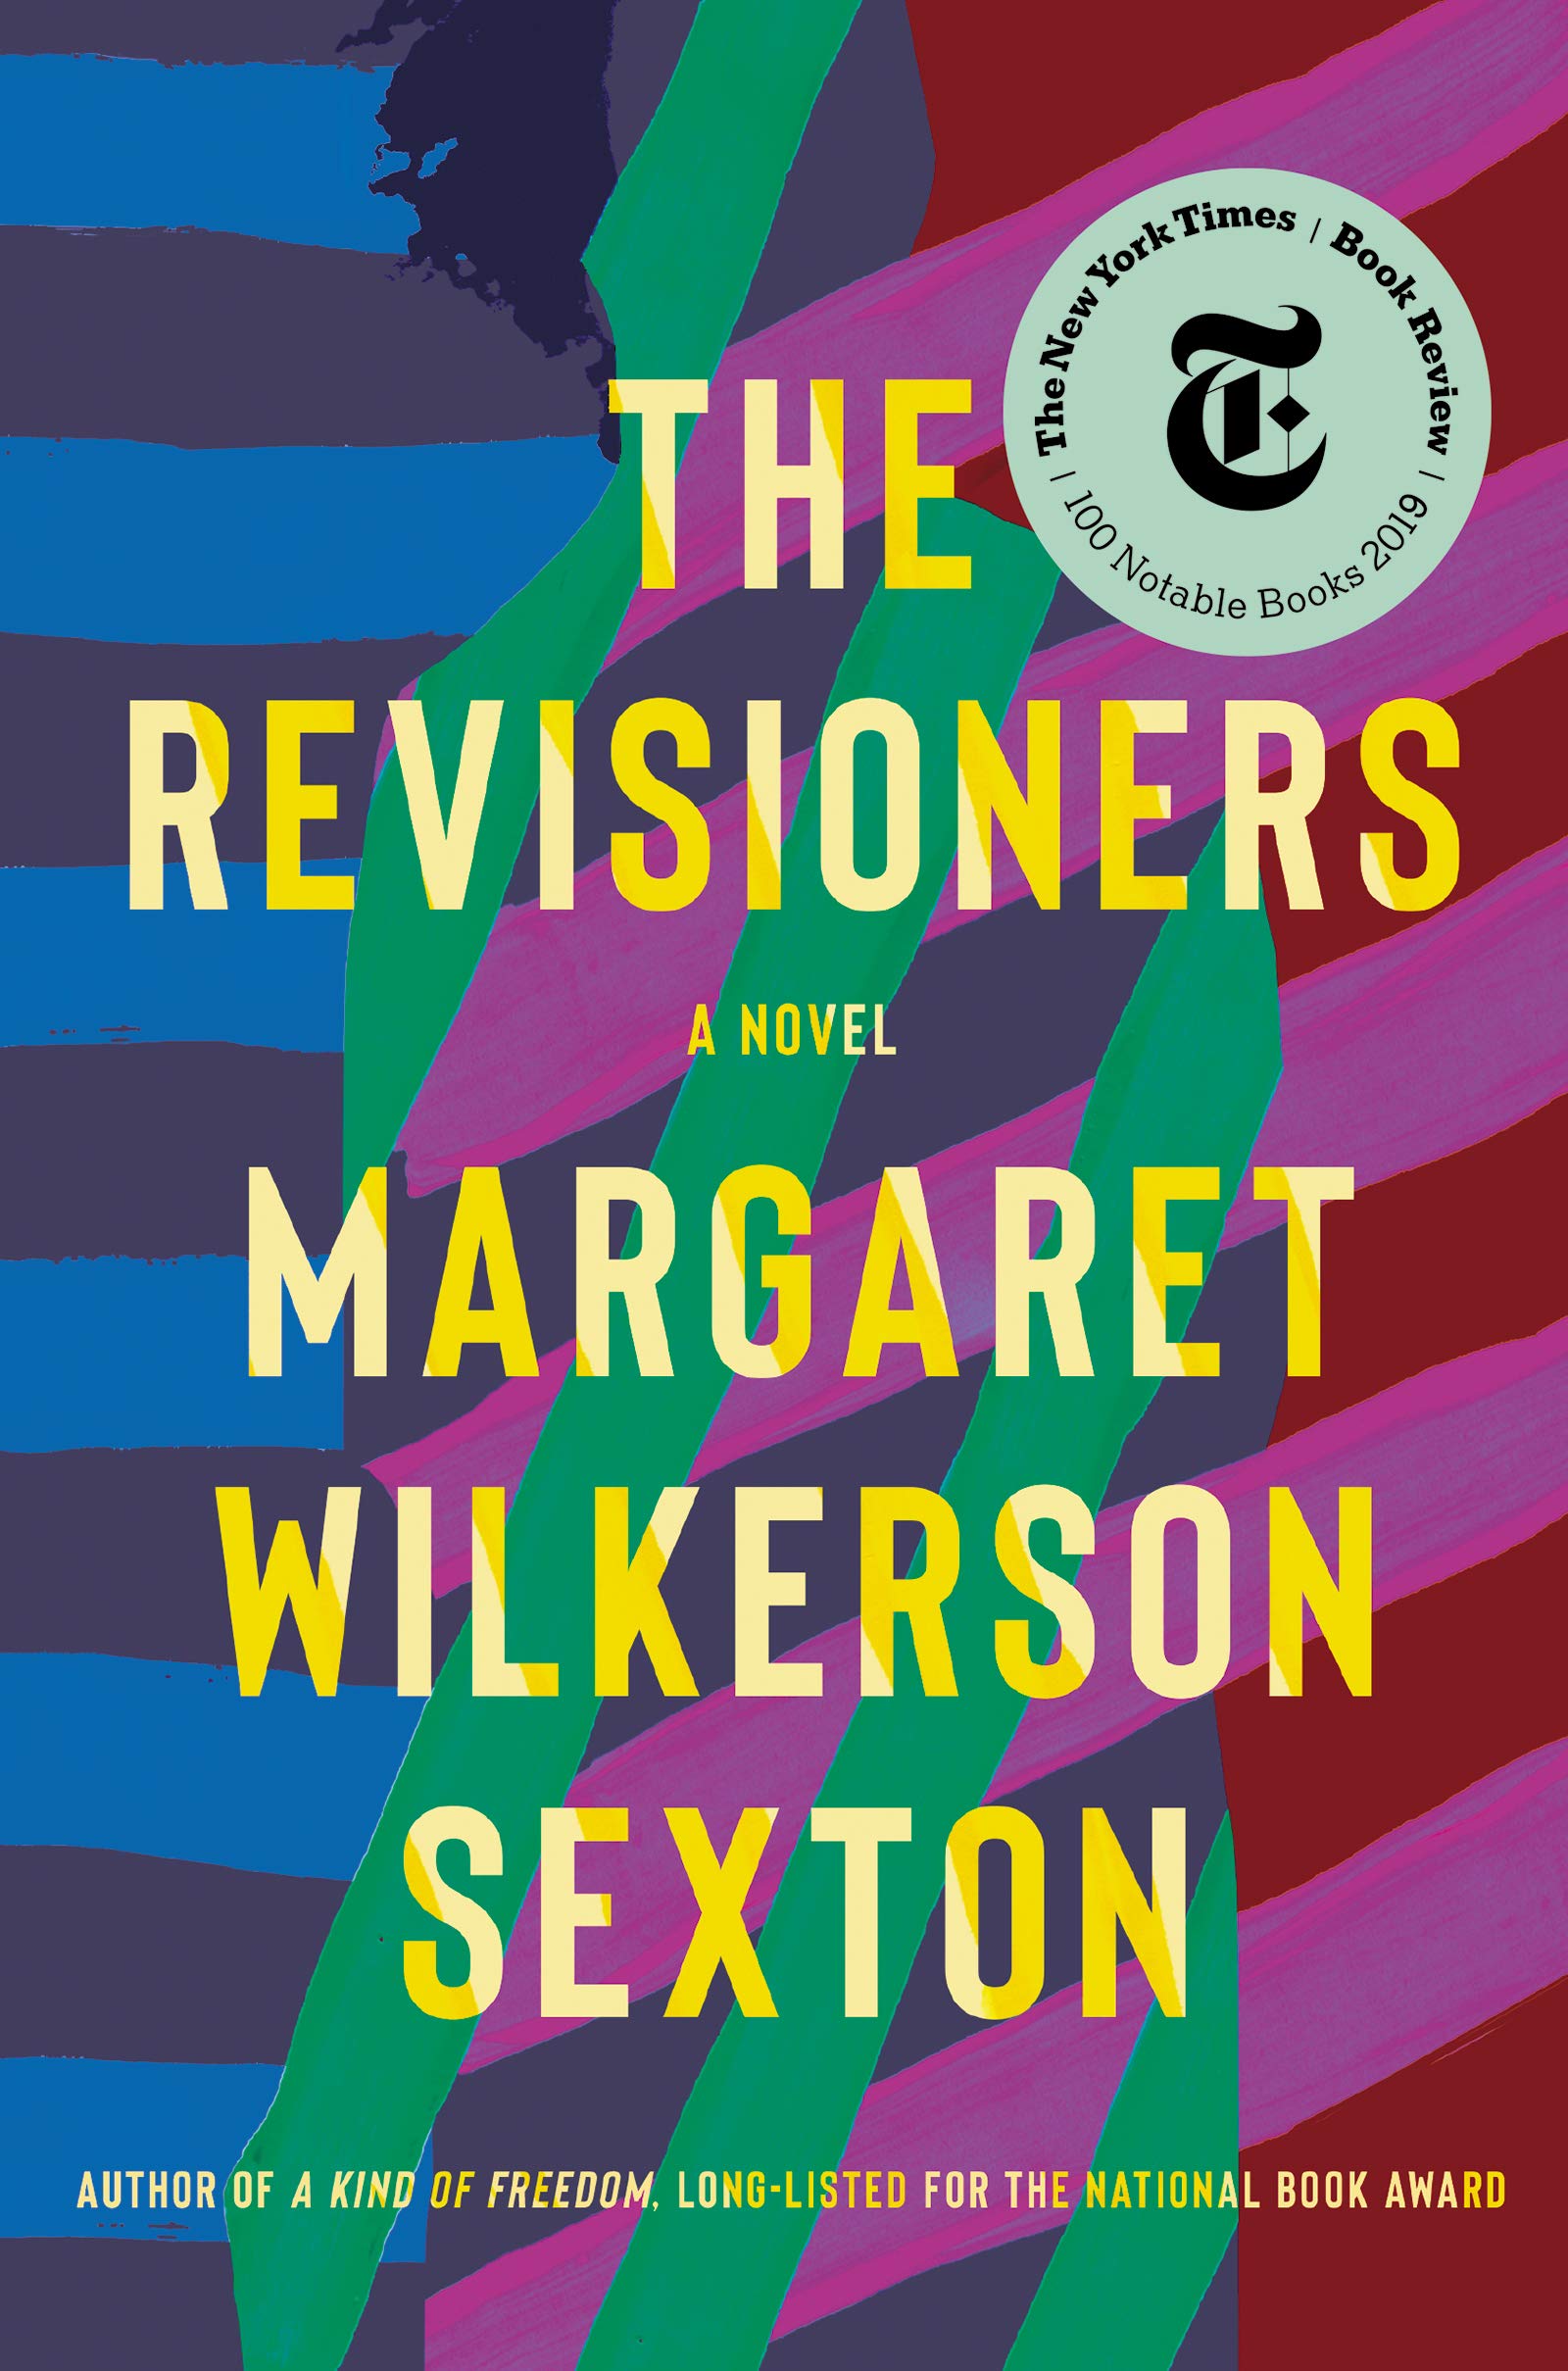 Cover of The Revisioners by Margaret Wilkerson